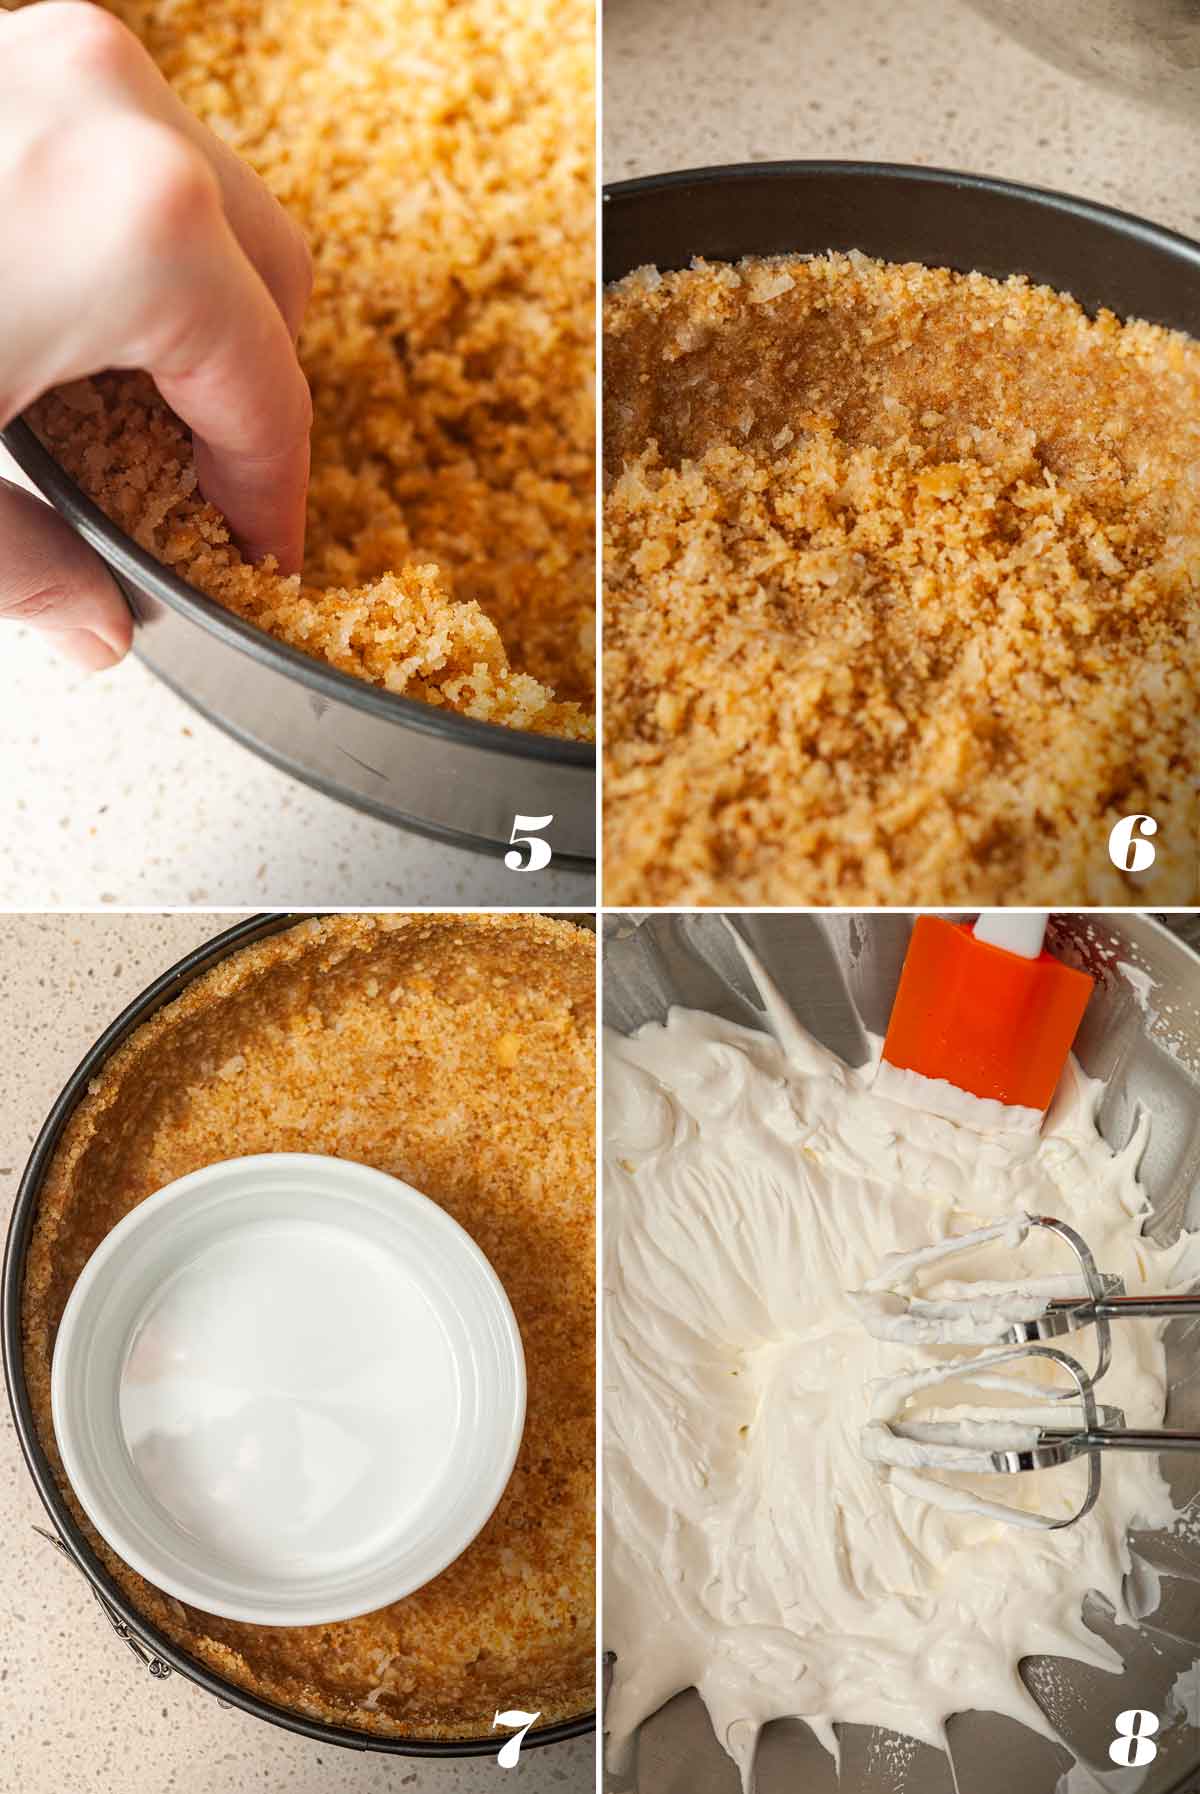 A collage of 4 numbered images showing how to create a no-bake crust and mix cream.